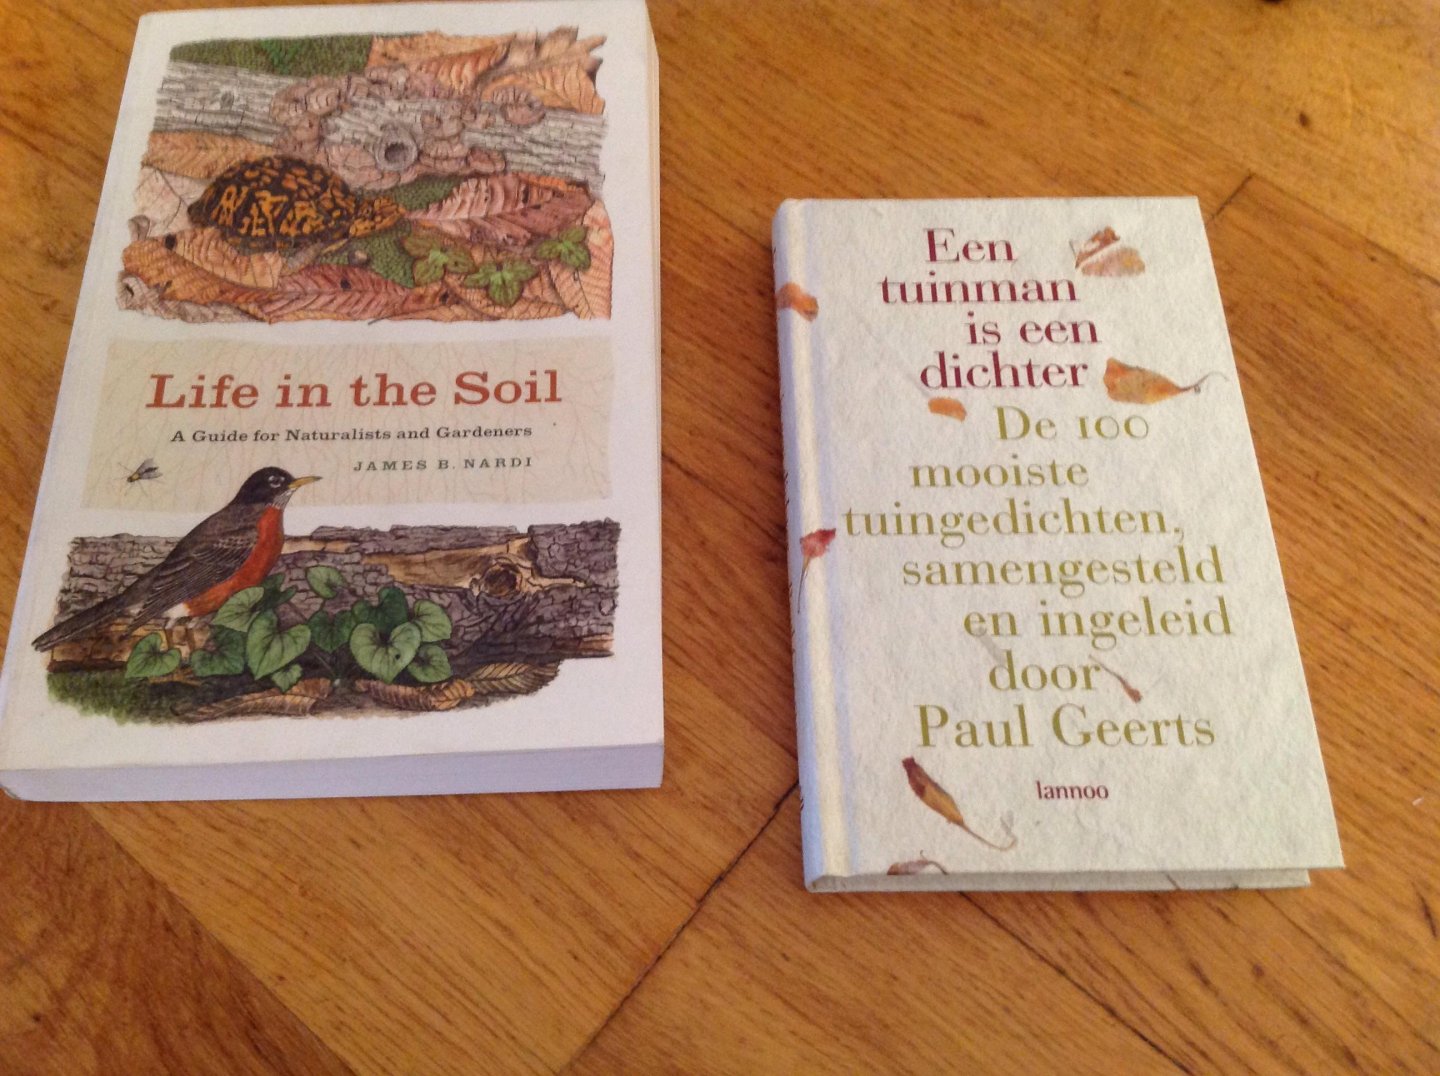 Nardi, James B. - Life in the Soil / A Guide for Naturalists and Gardeners